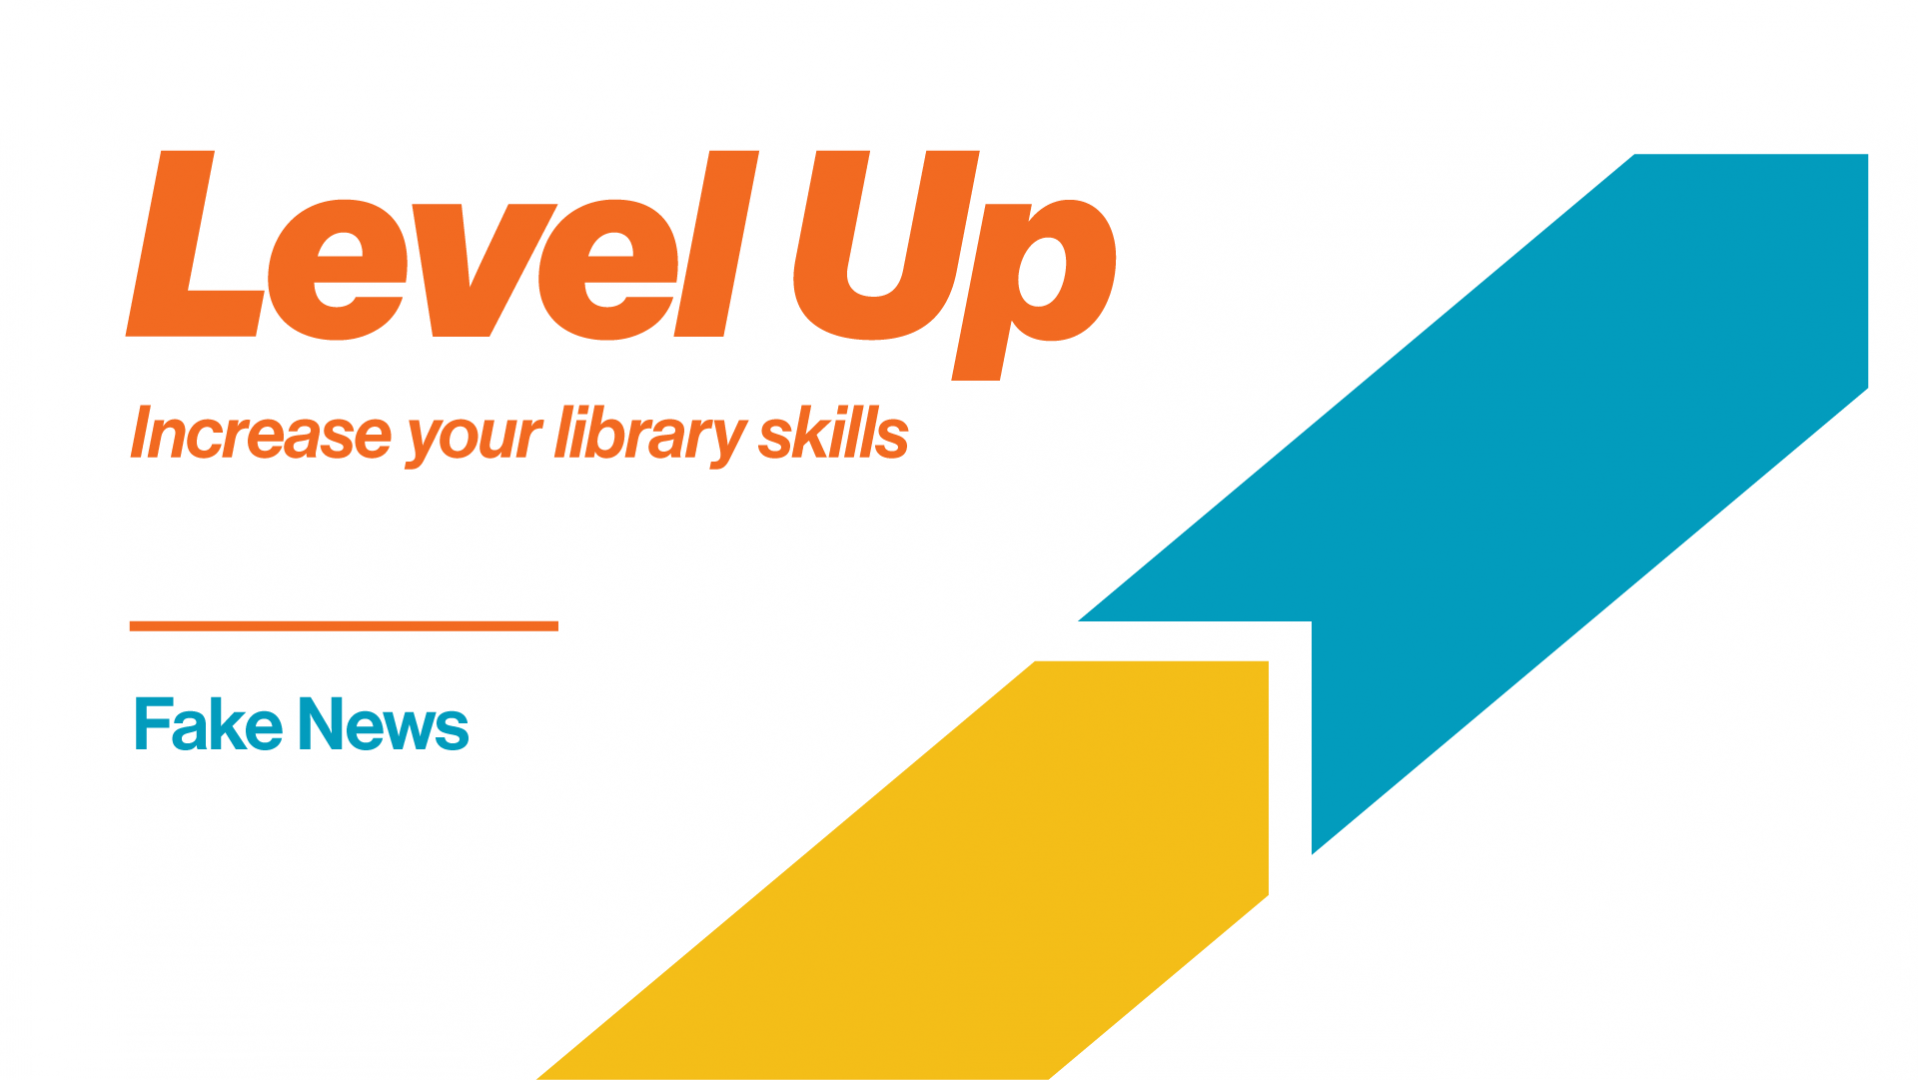 Level Up: Increase your library skills. Fake News